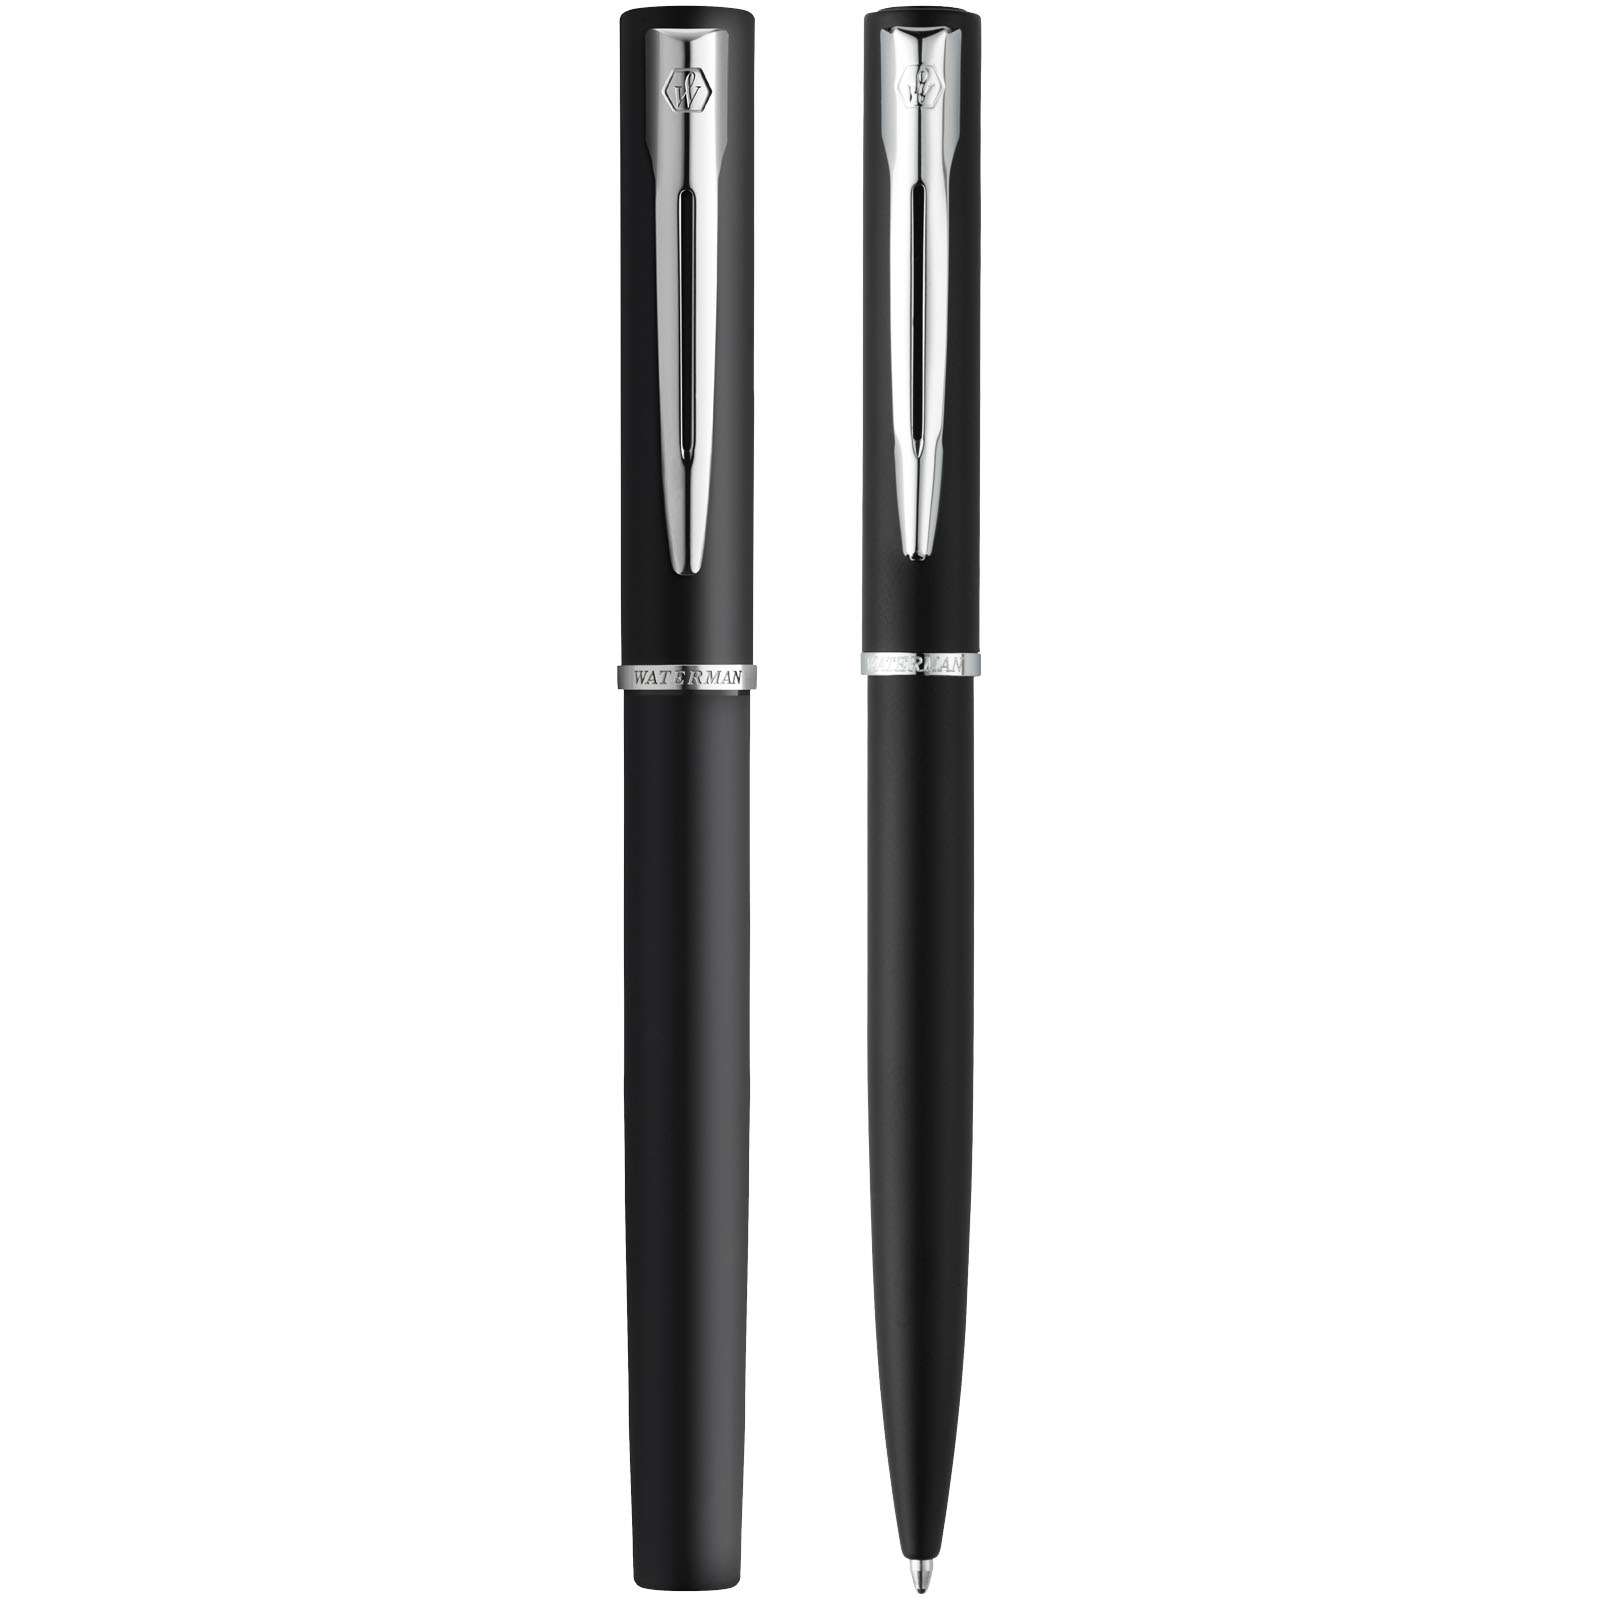 Advertising Gift sets - Waterman Allure ballpoint and rollerball pen set - 2